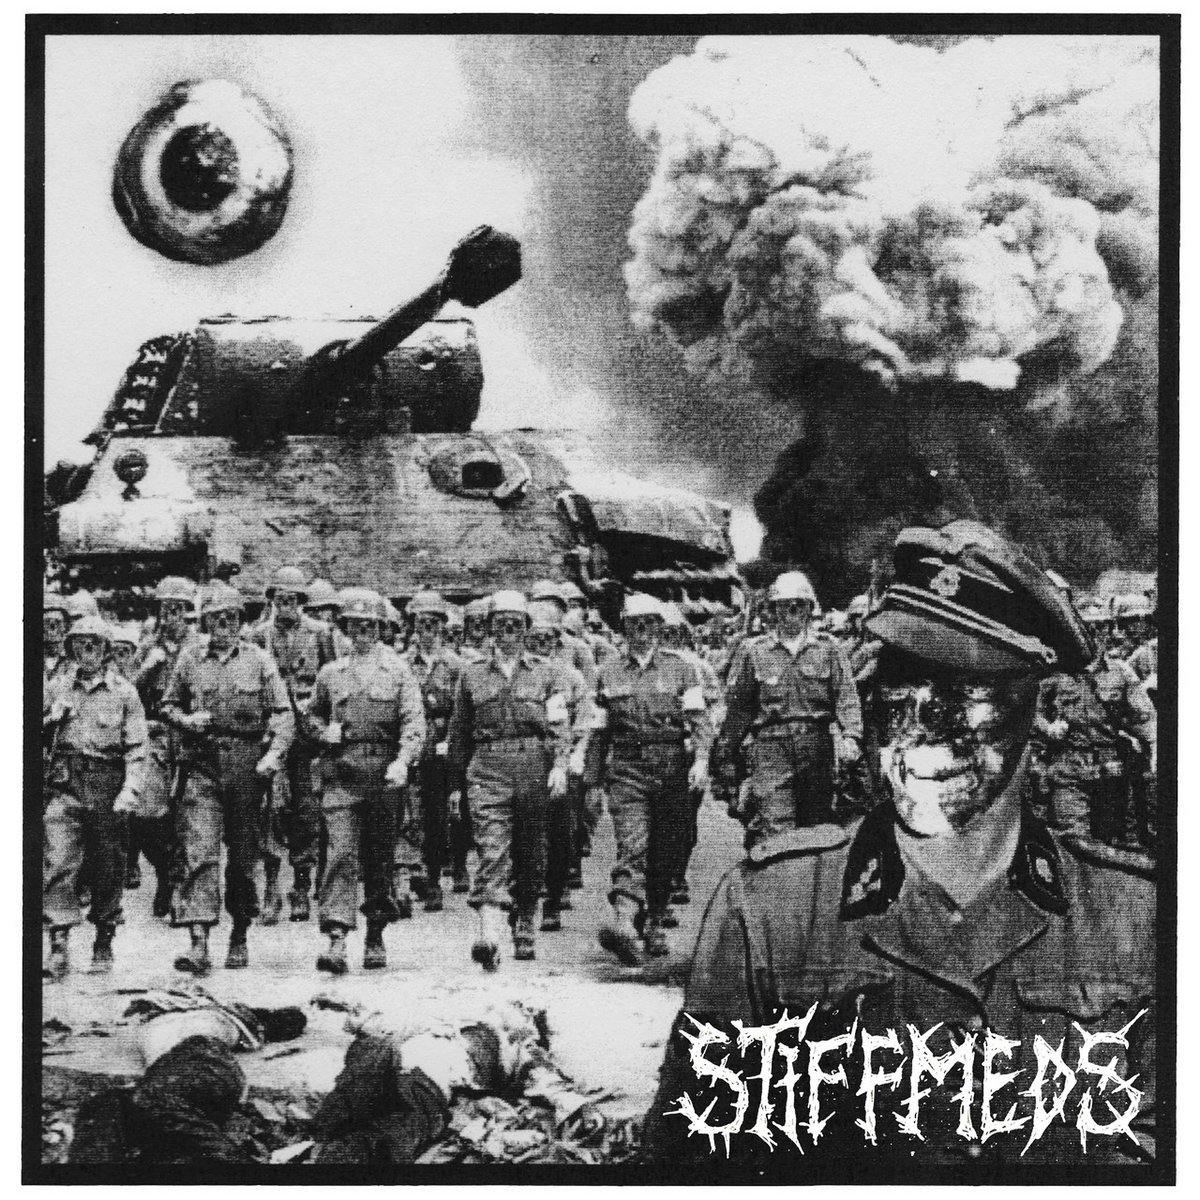 Buy – Stiff Meds "Exciting Violence" Cassette – Band & Music Merch – Cold Cuts Merch